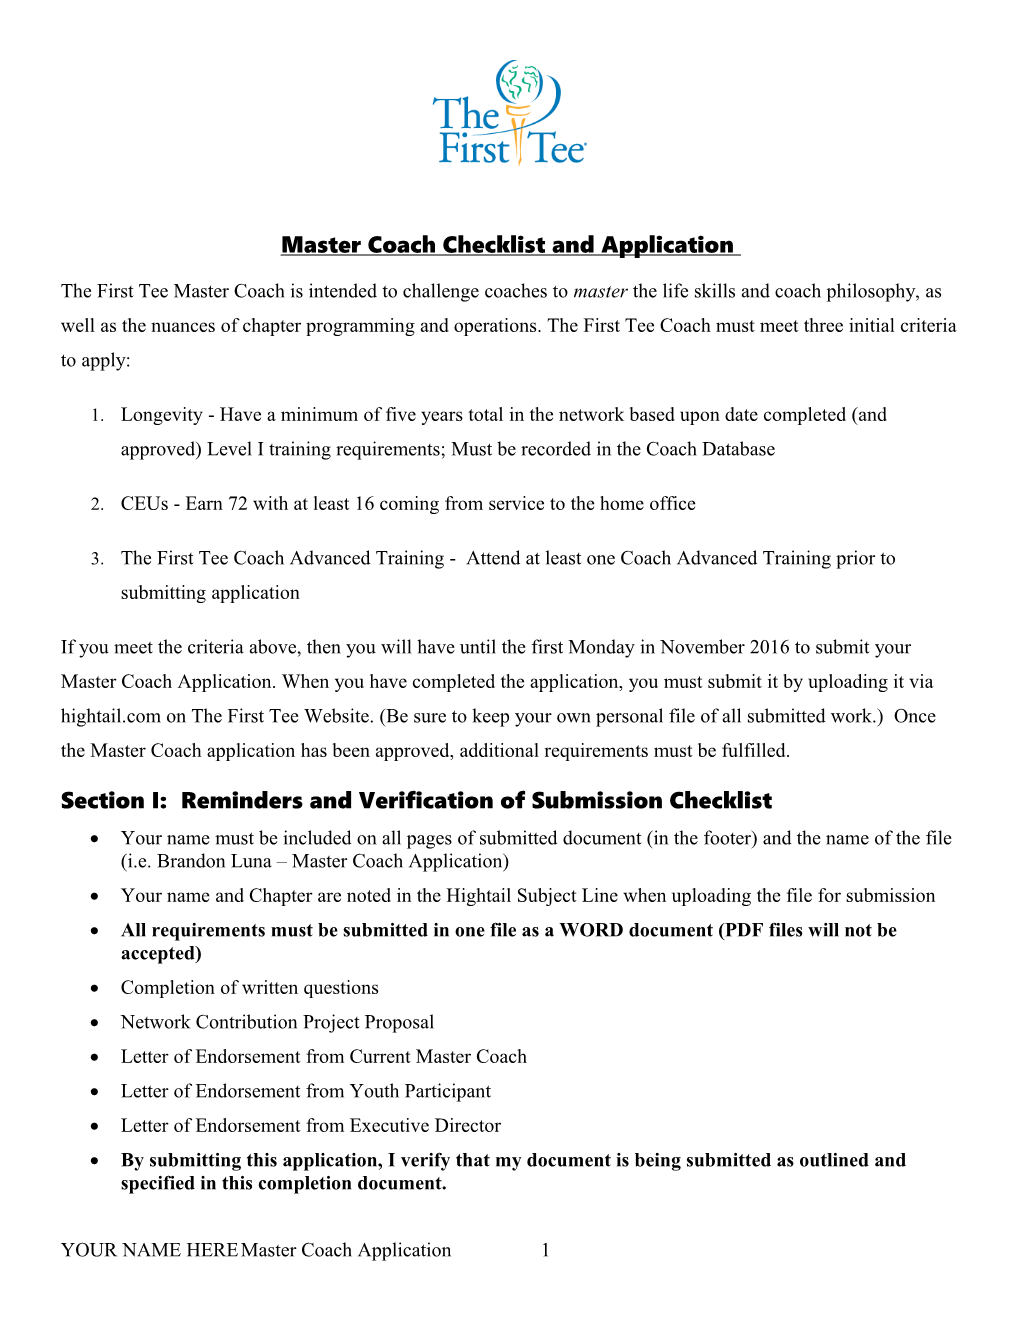 Master Coach Checklist and Application